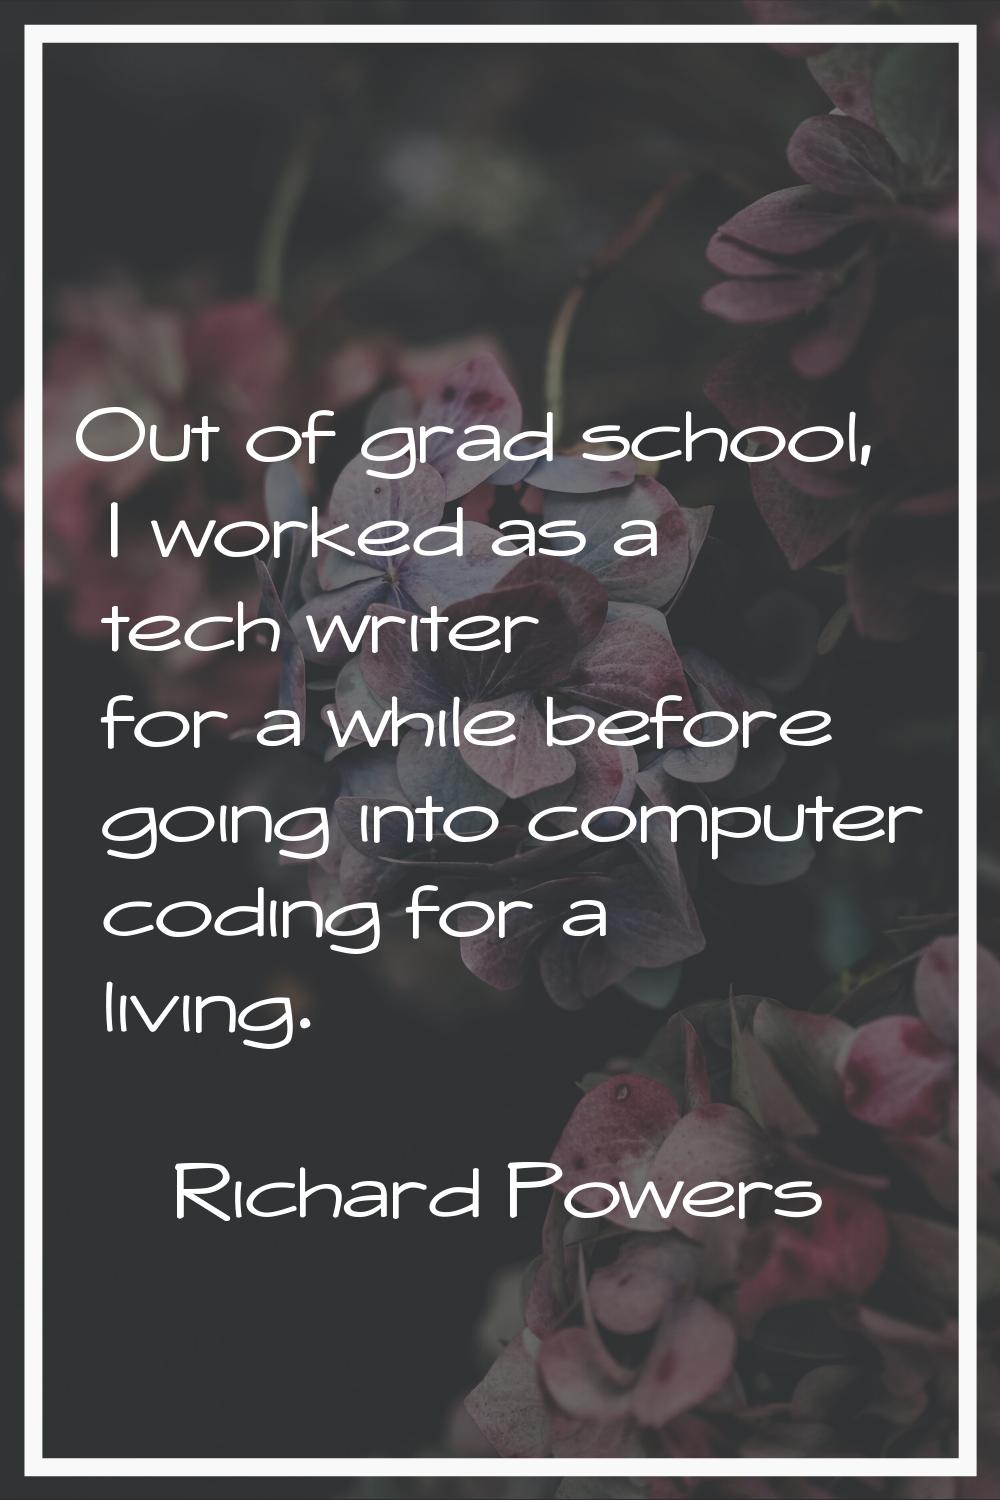 Out of grad school, I worked as a tech writer for a while before going into computer coding for a l